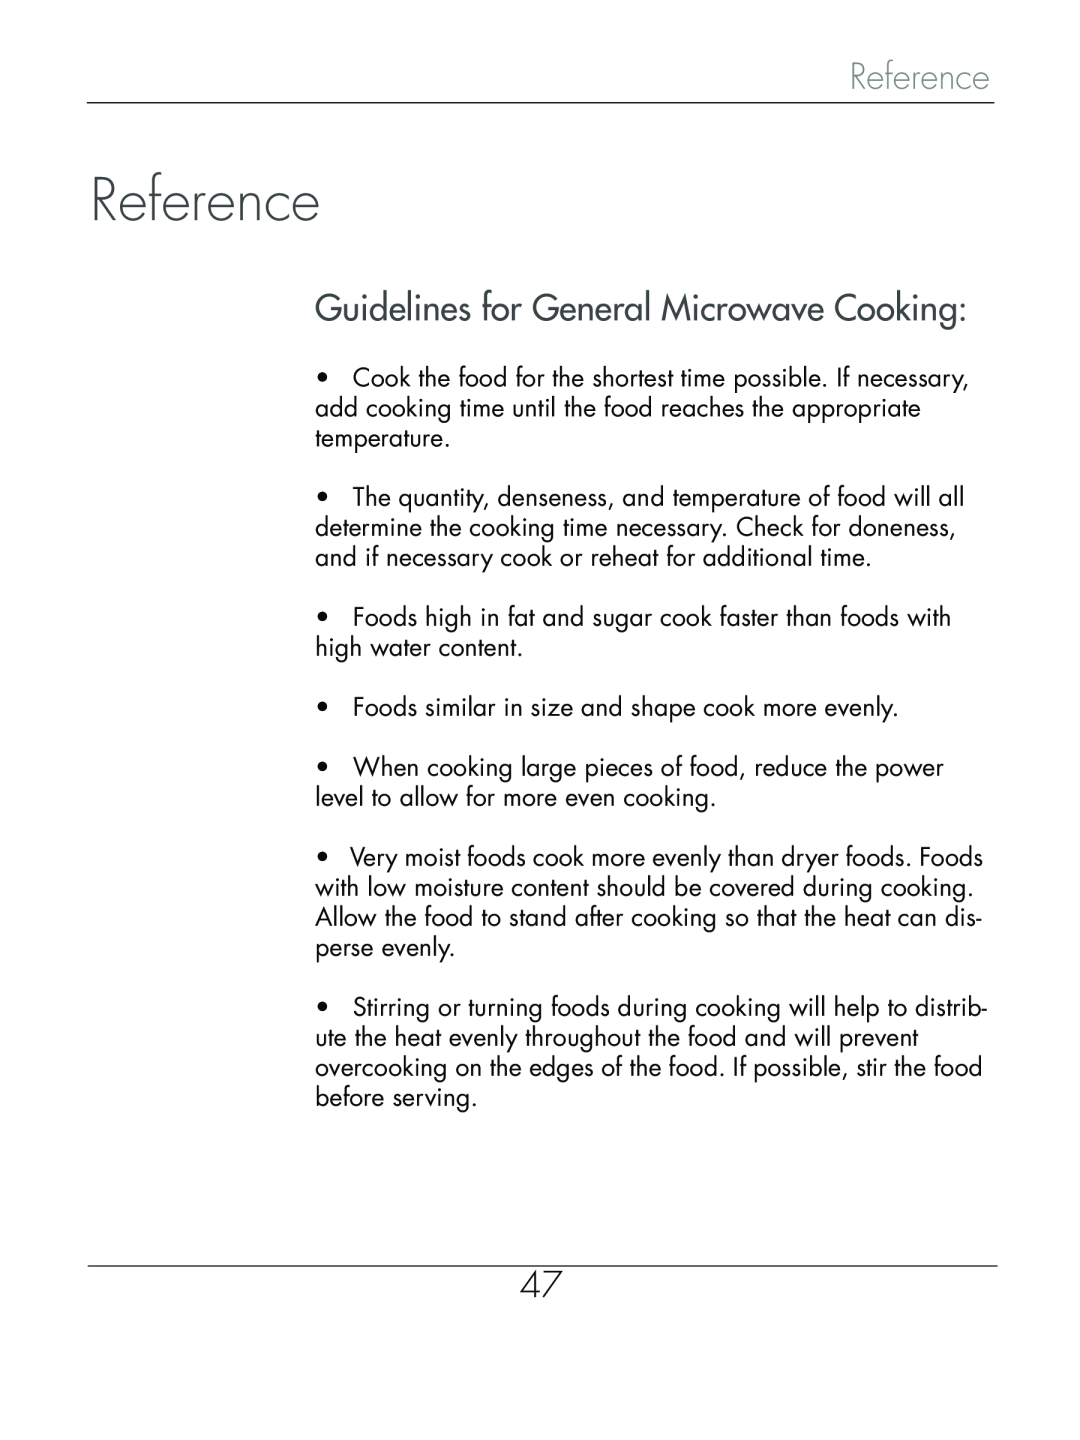 Beyond Microwace Oven manual Reference, Guidelines for General Microwave Cooking 